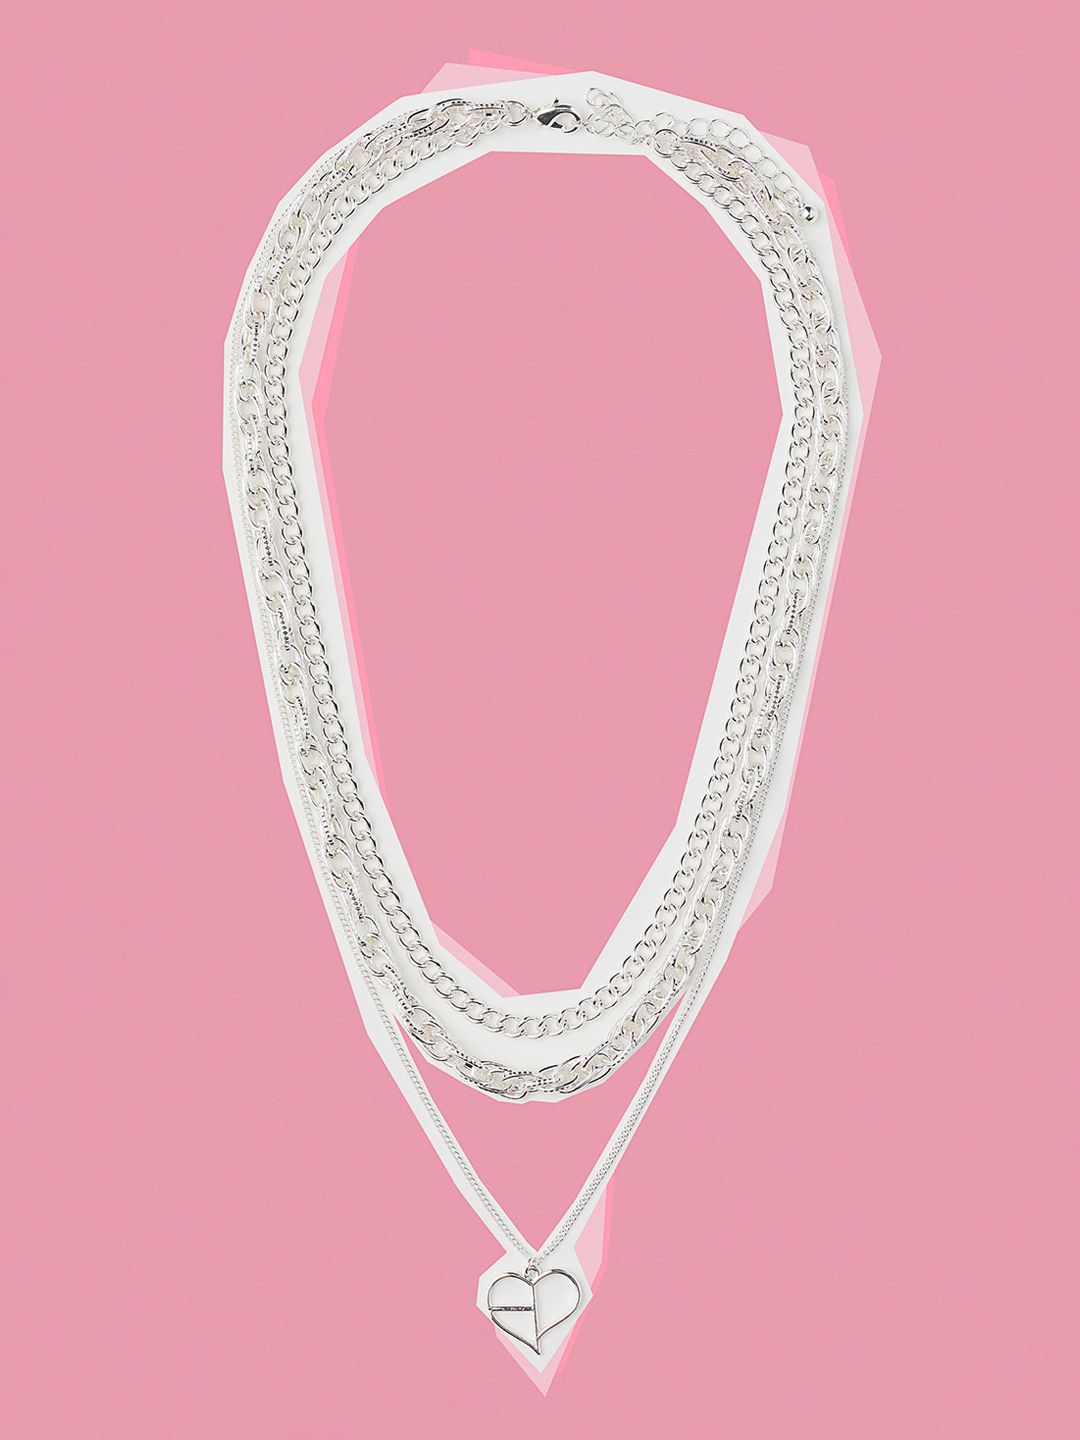 H&M Women Silver-Toned Three-Strand Necklace Price in India